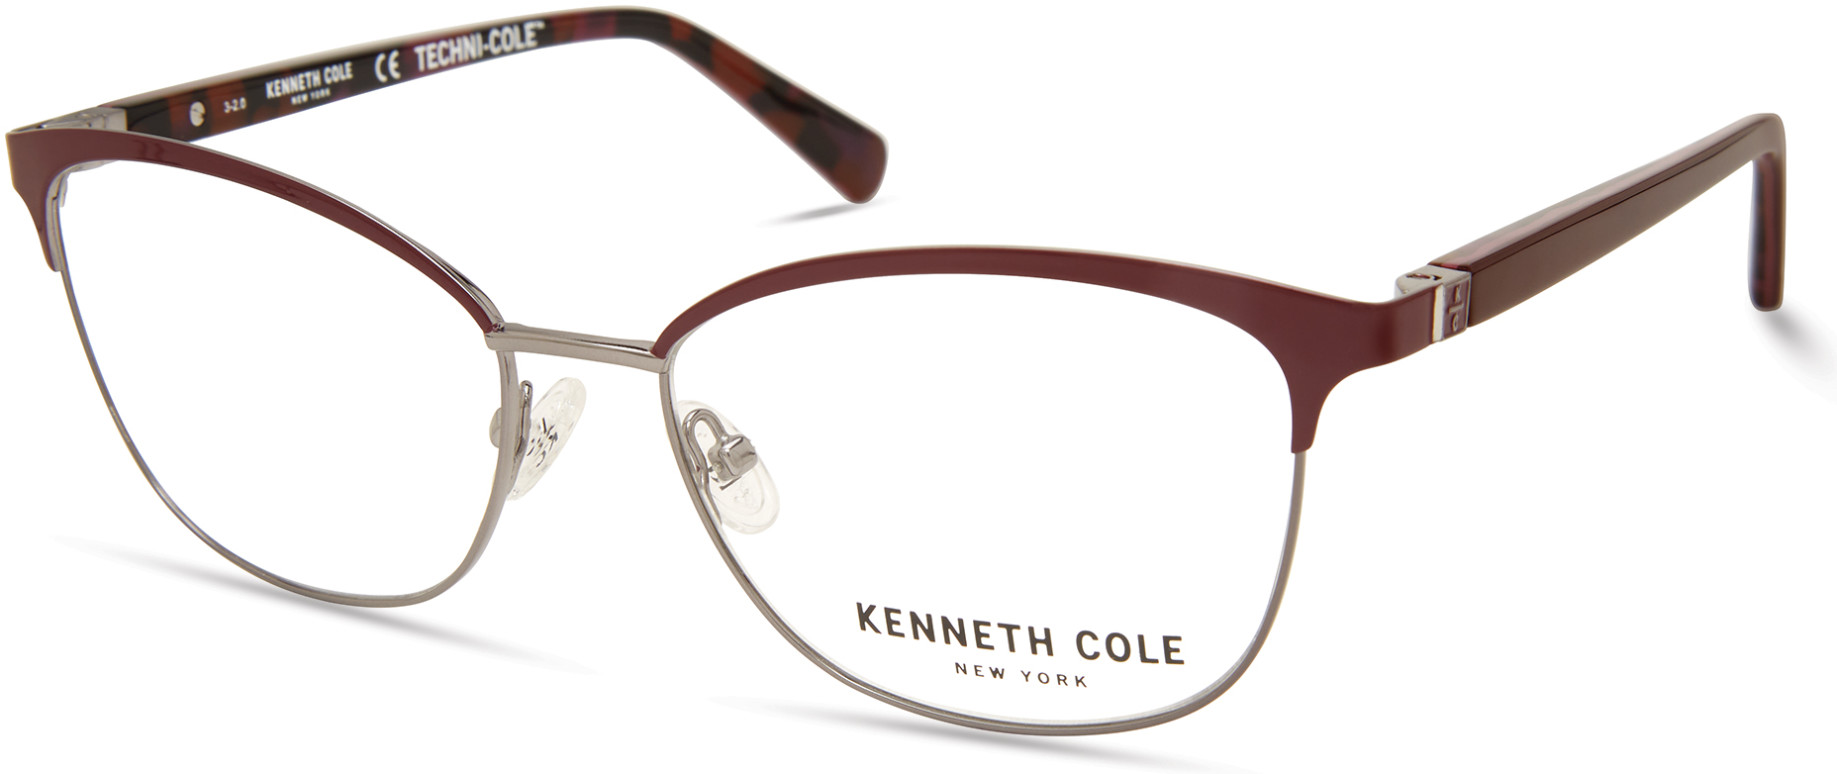 KENNETH COLE NY 0329 075